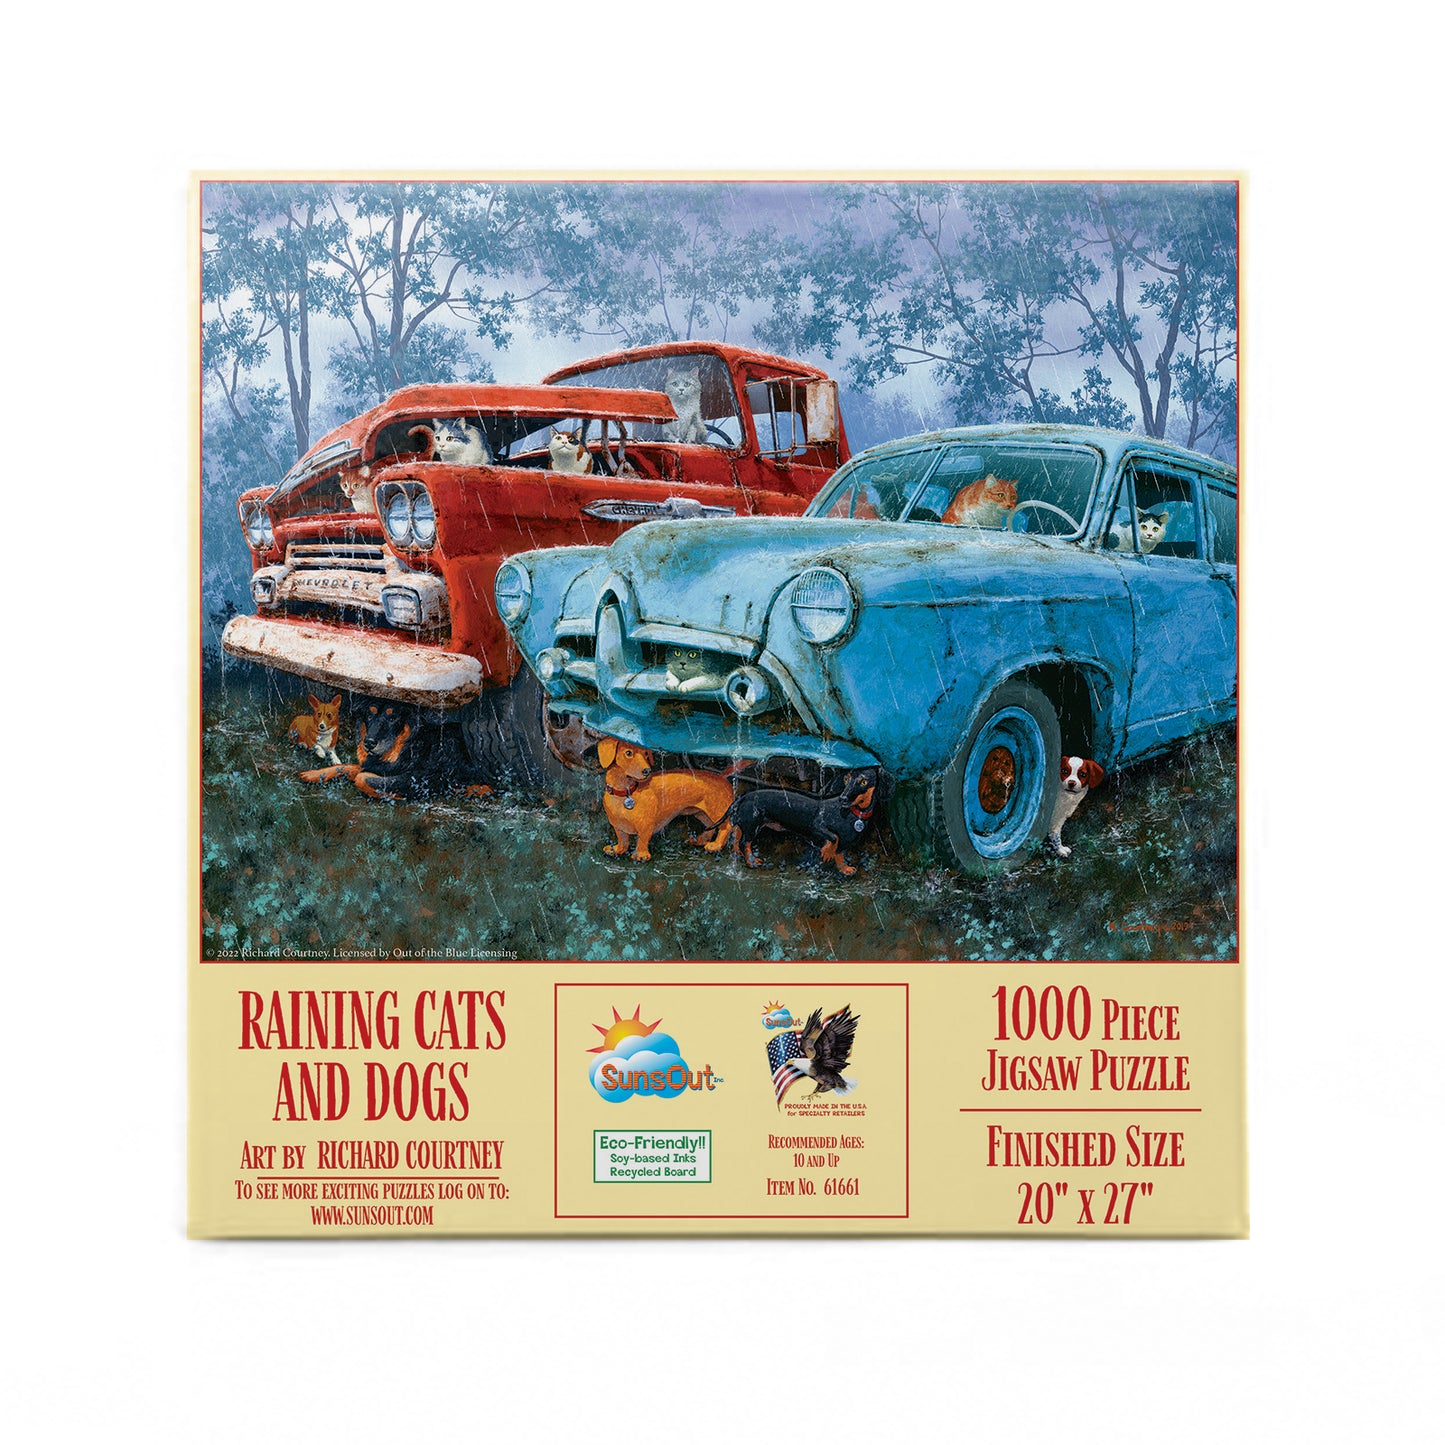 Raining Cats and Dogs - 1000 Piece Jigsaw Puzzle